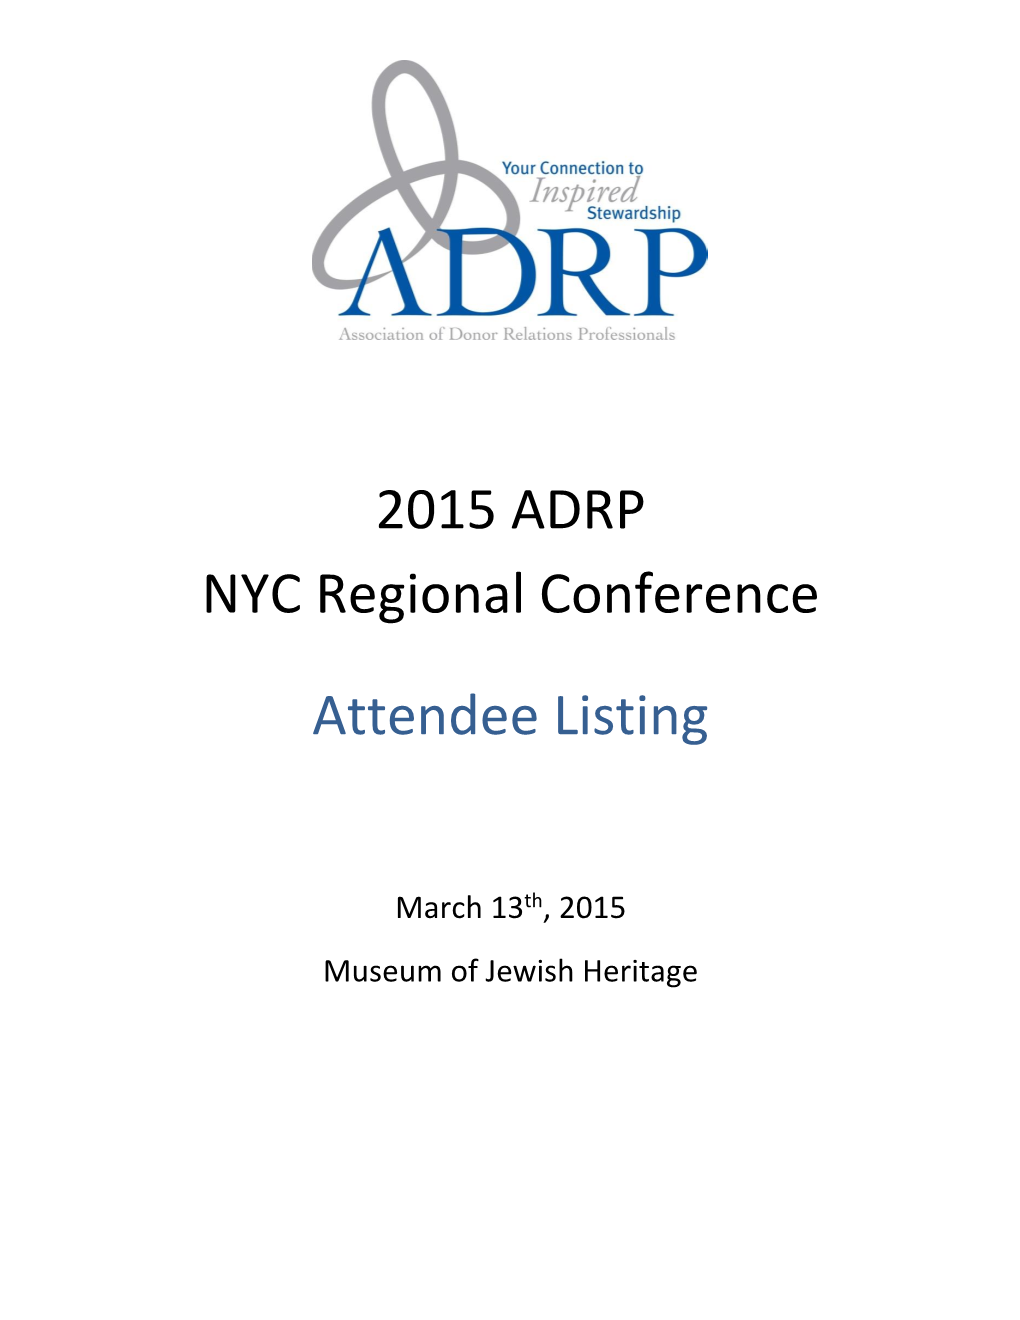 2015 ADRP NYC Regional Conference Attendee Listing